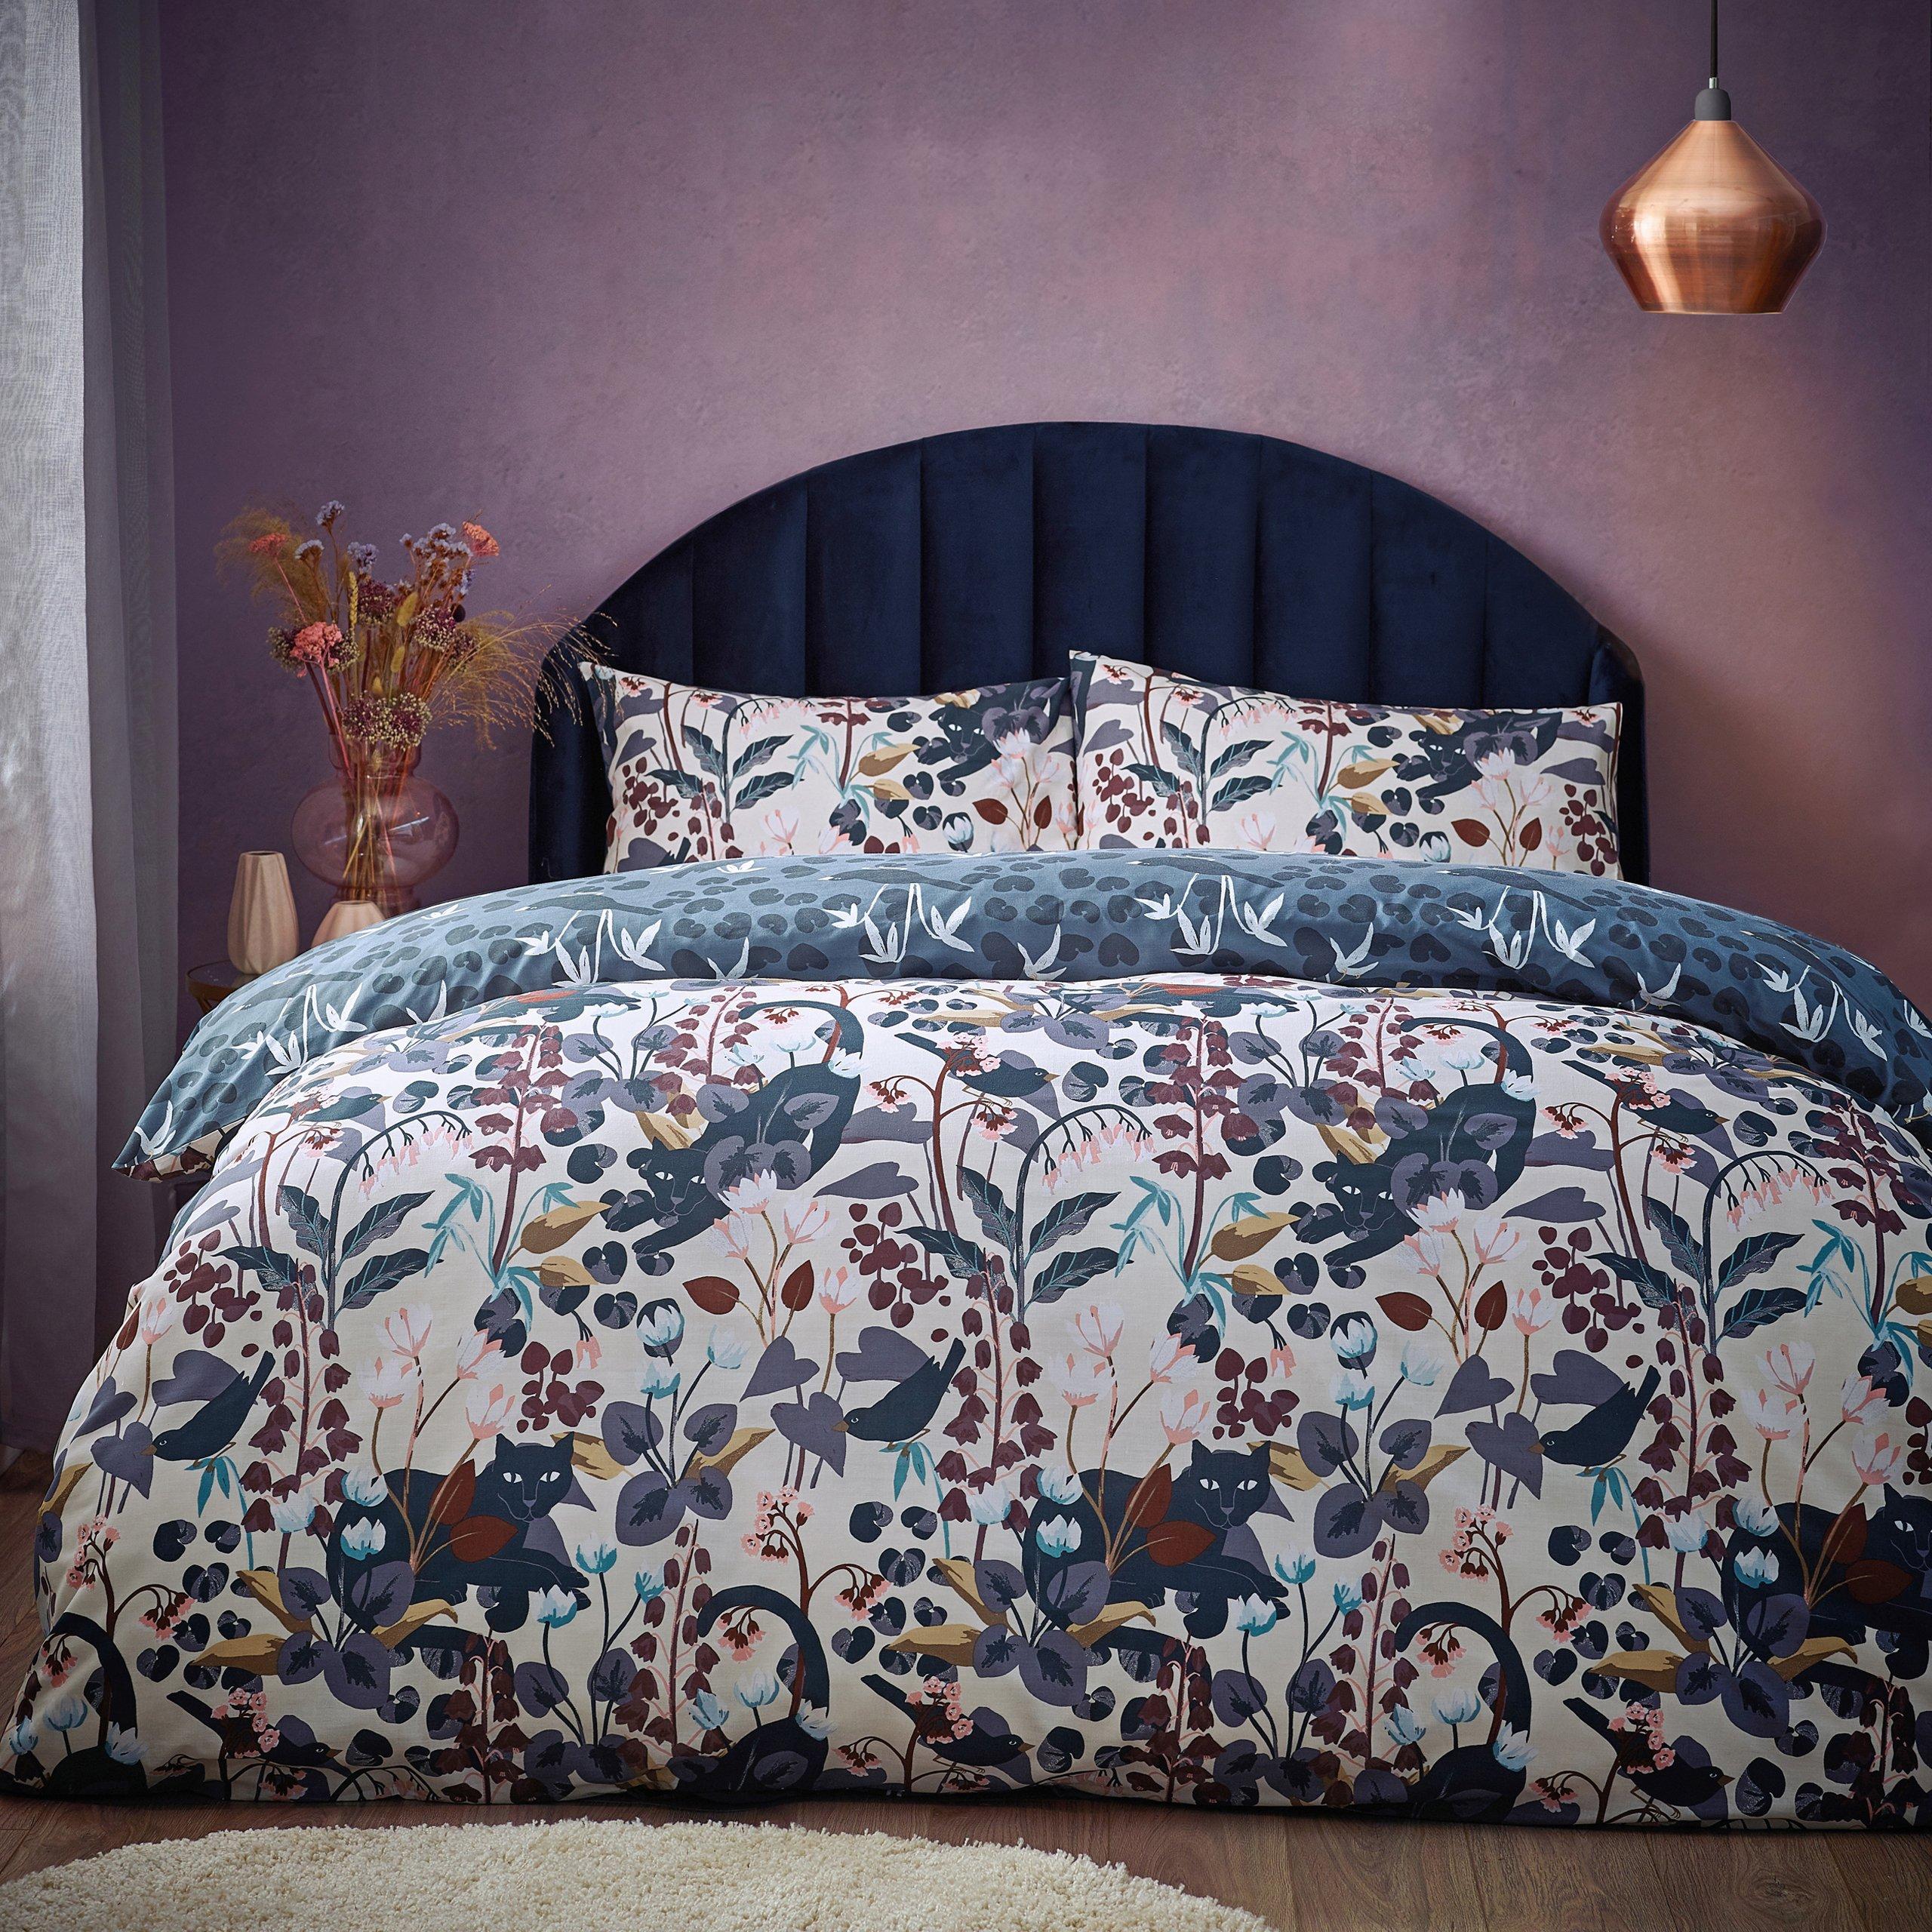 Midnight Panther Duvet Cover Set